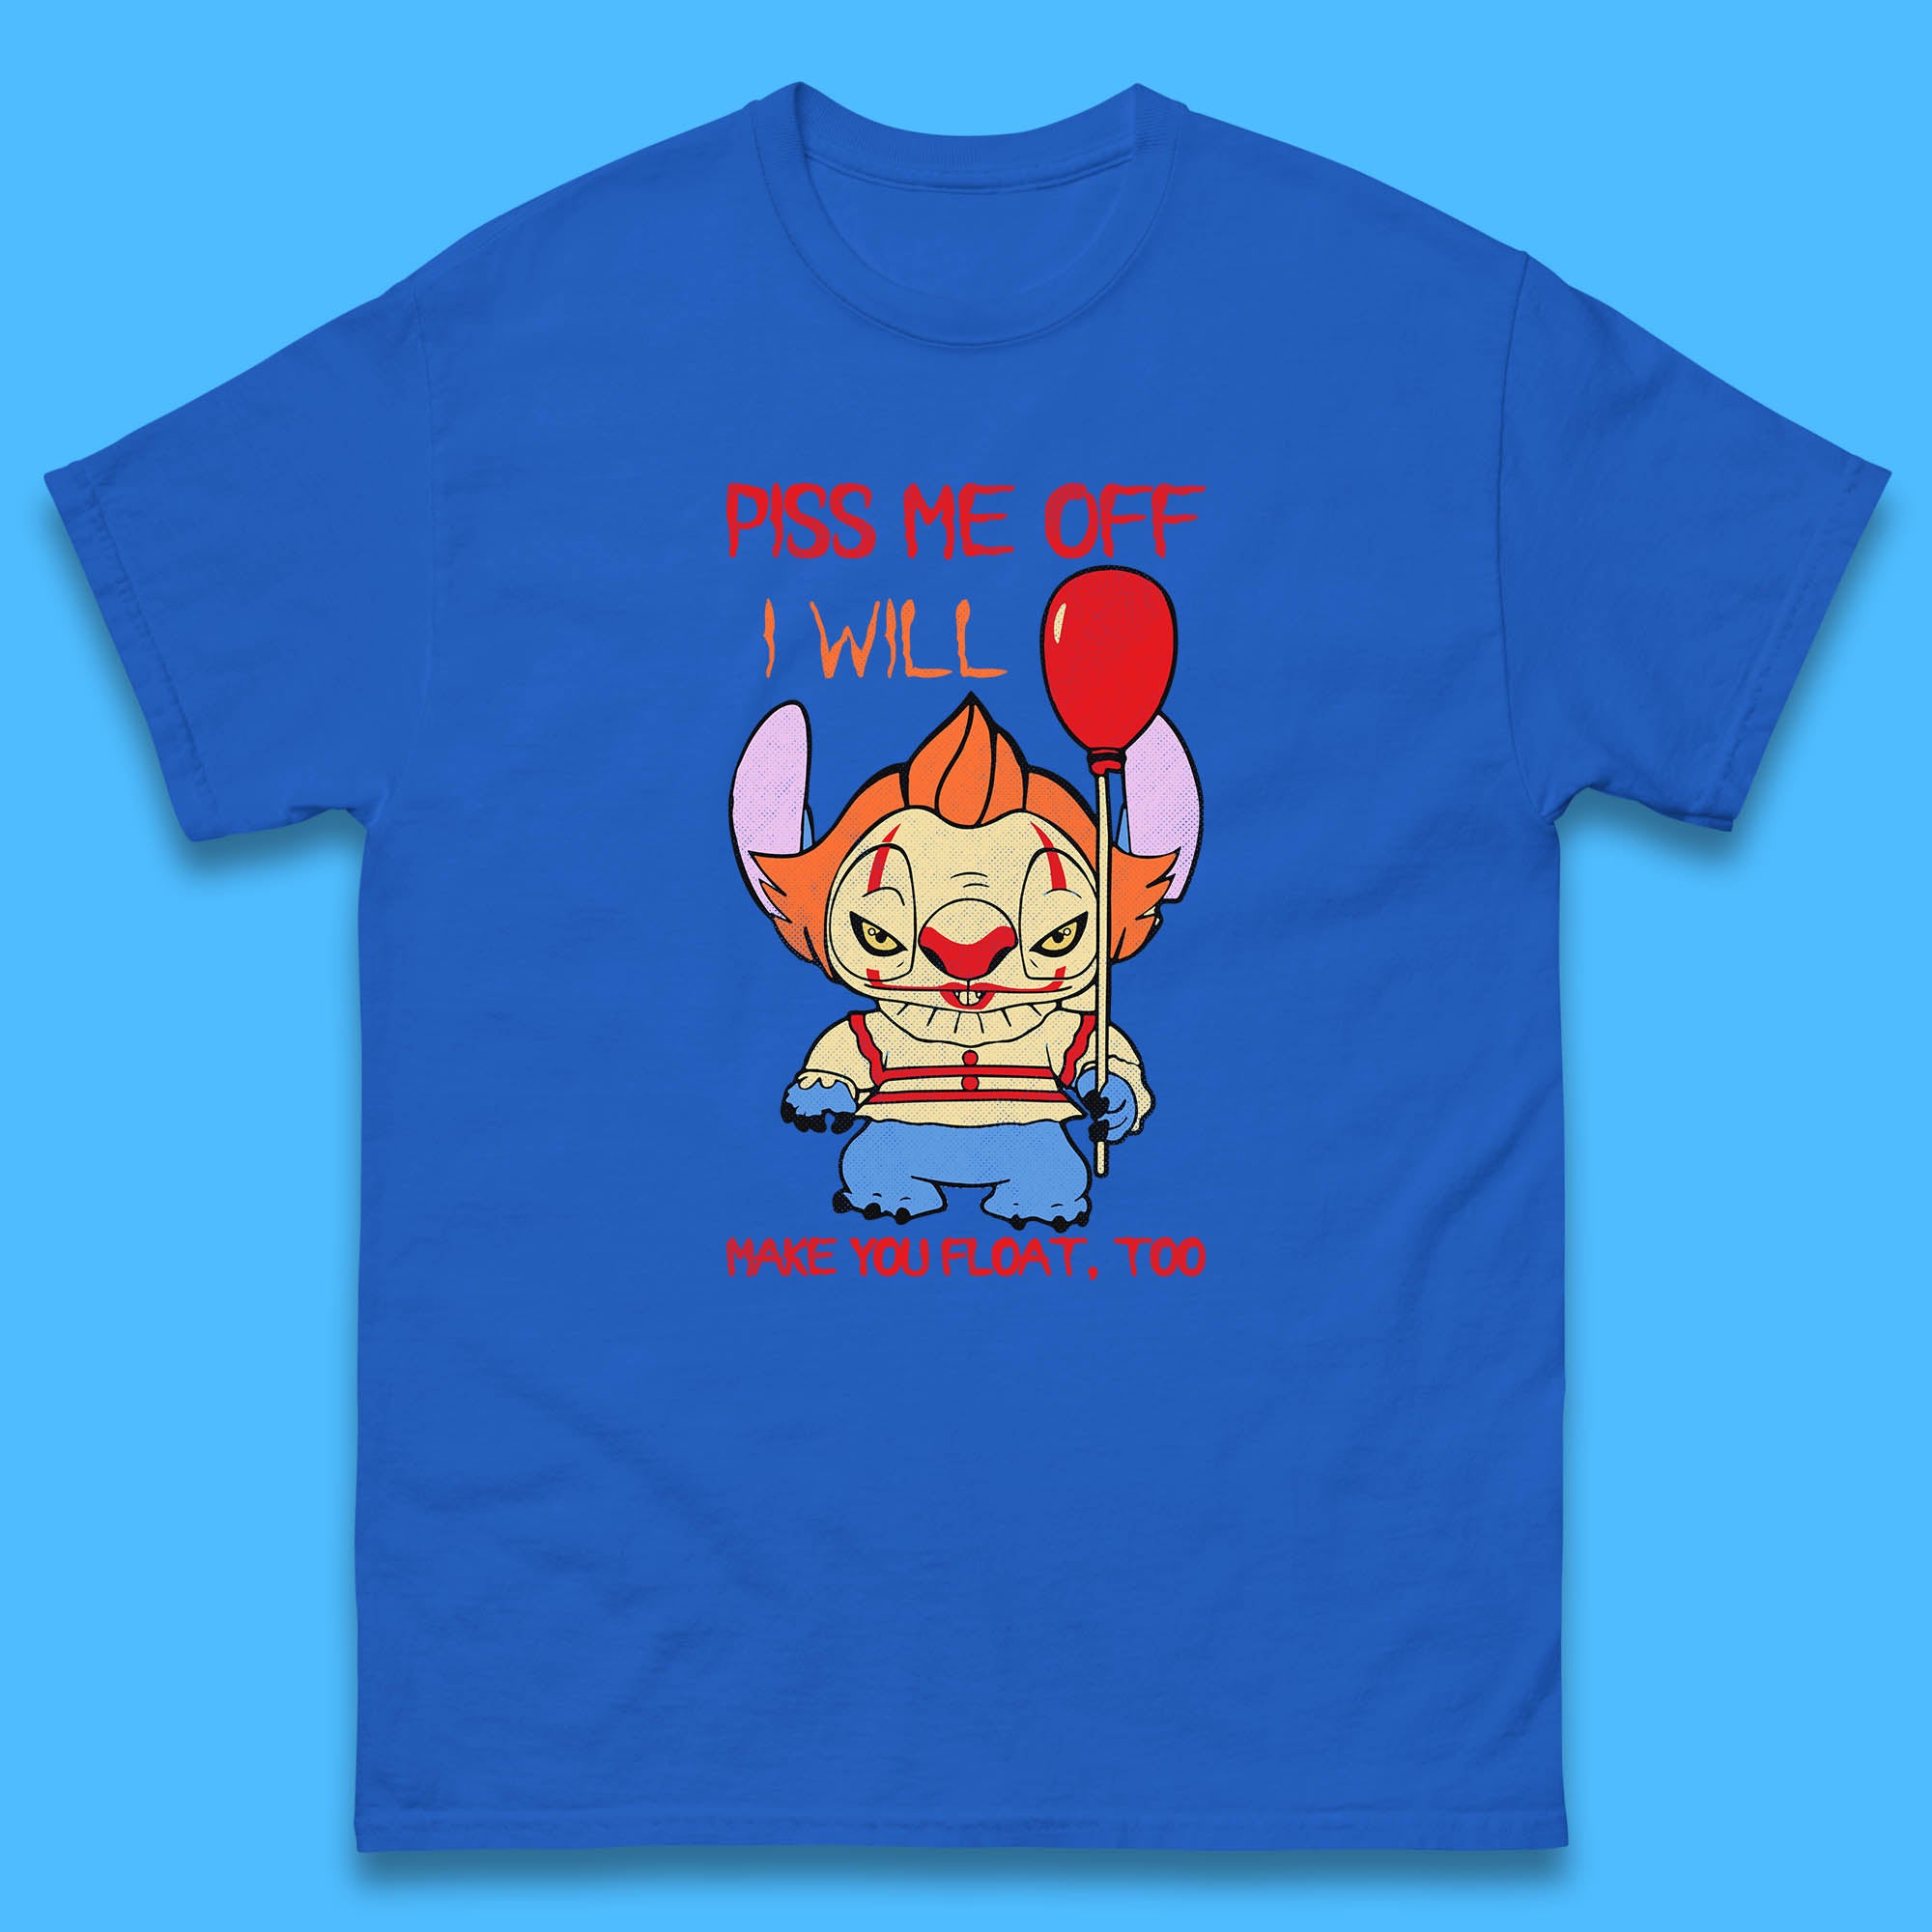 Piss Me Off I Will Make You Float, Too Halloween IT Pennywise Clown & Disney Stitch Movie Mashup Parody Mens Tee Top